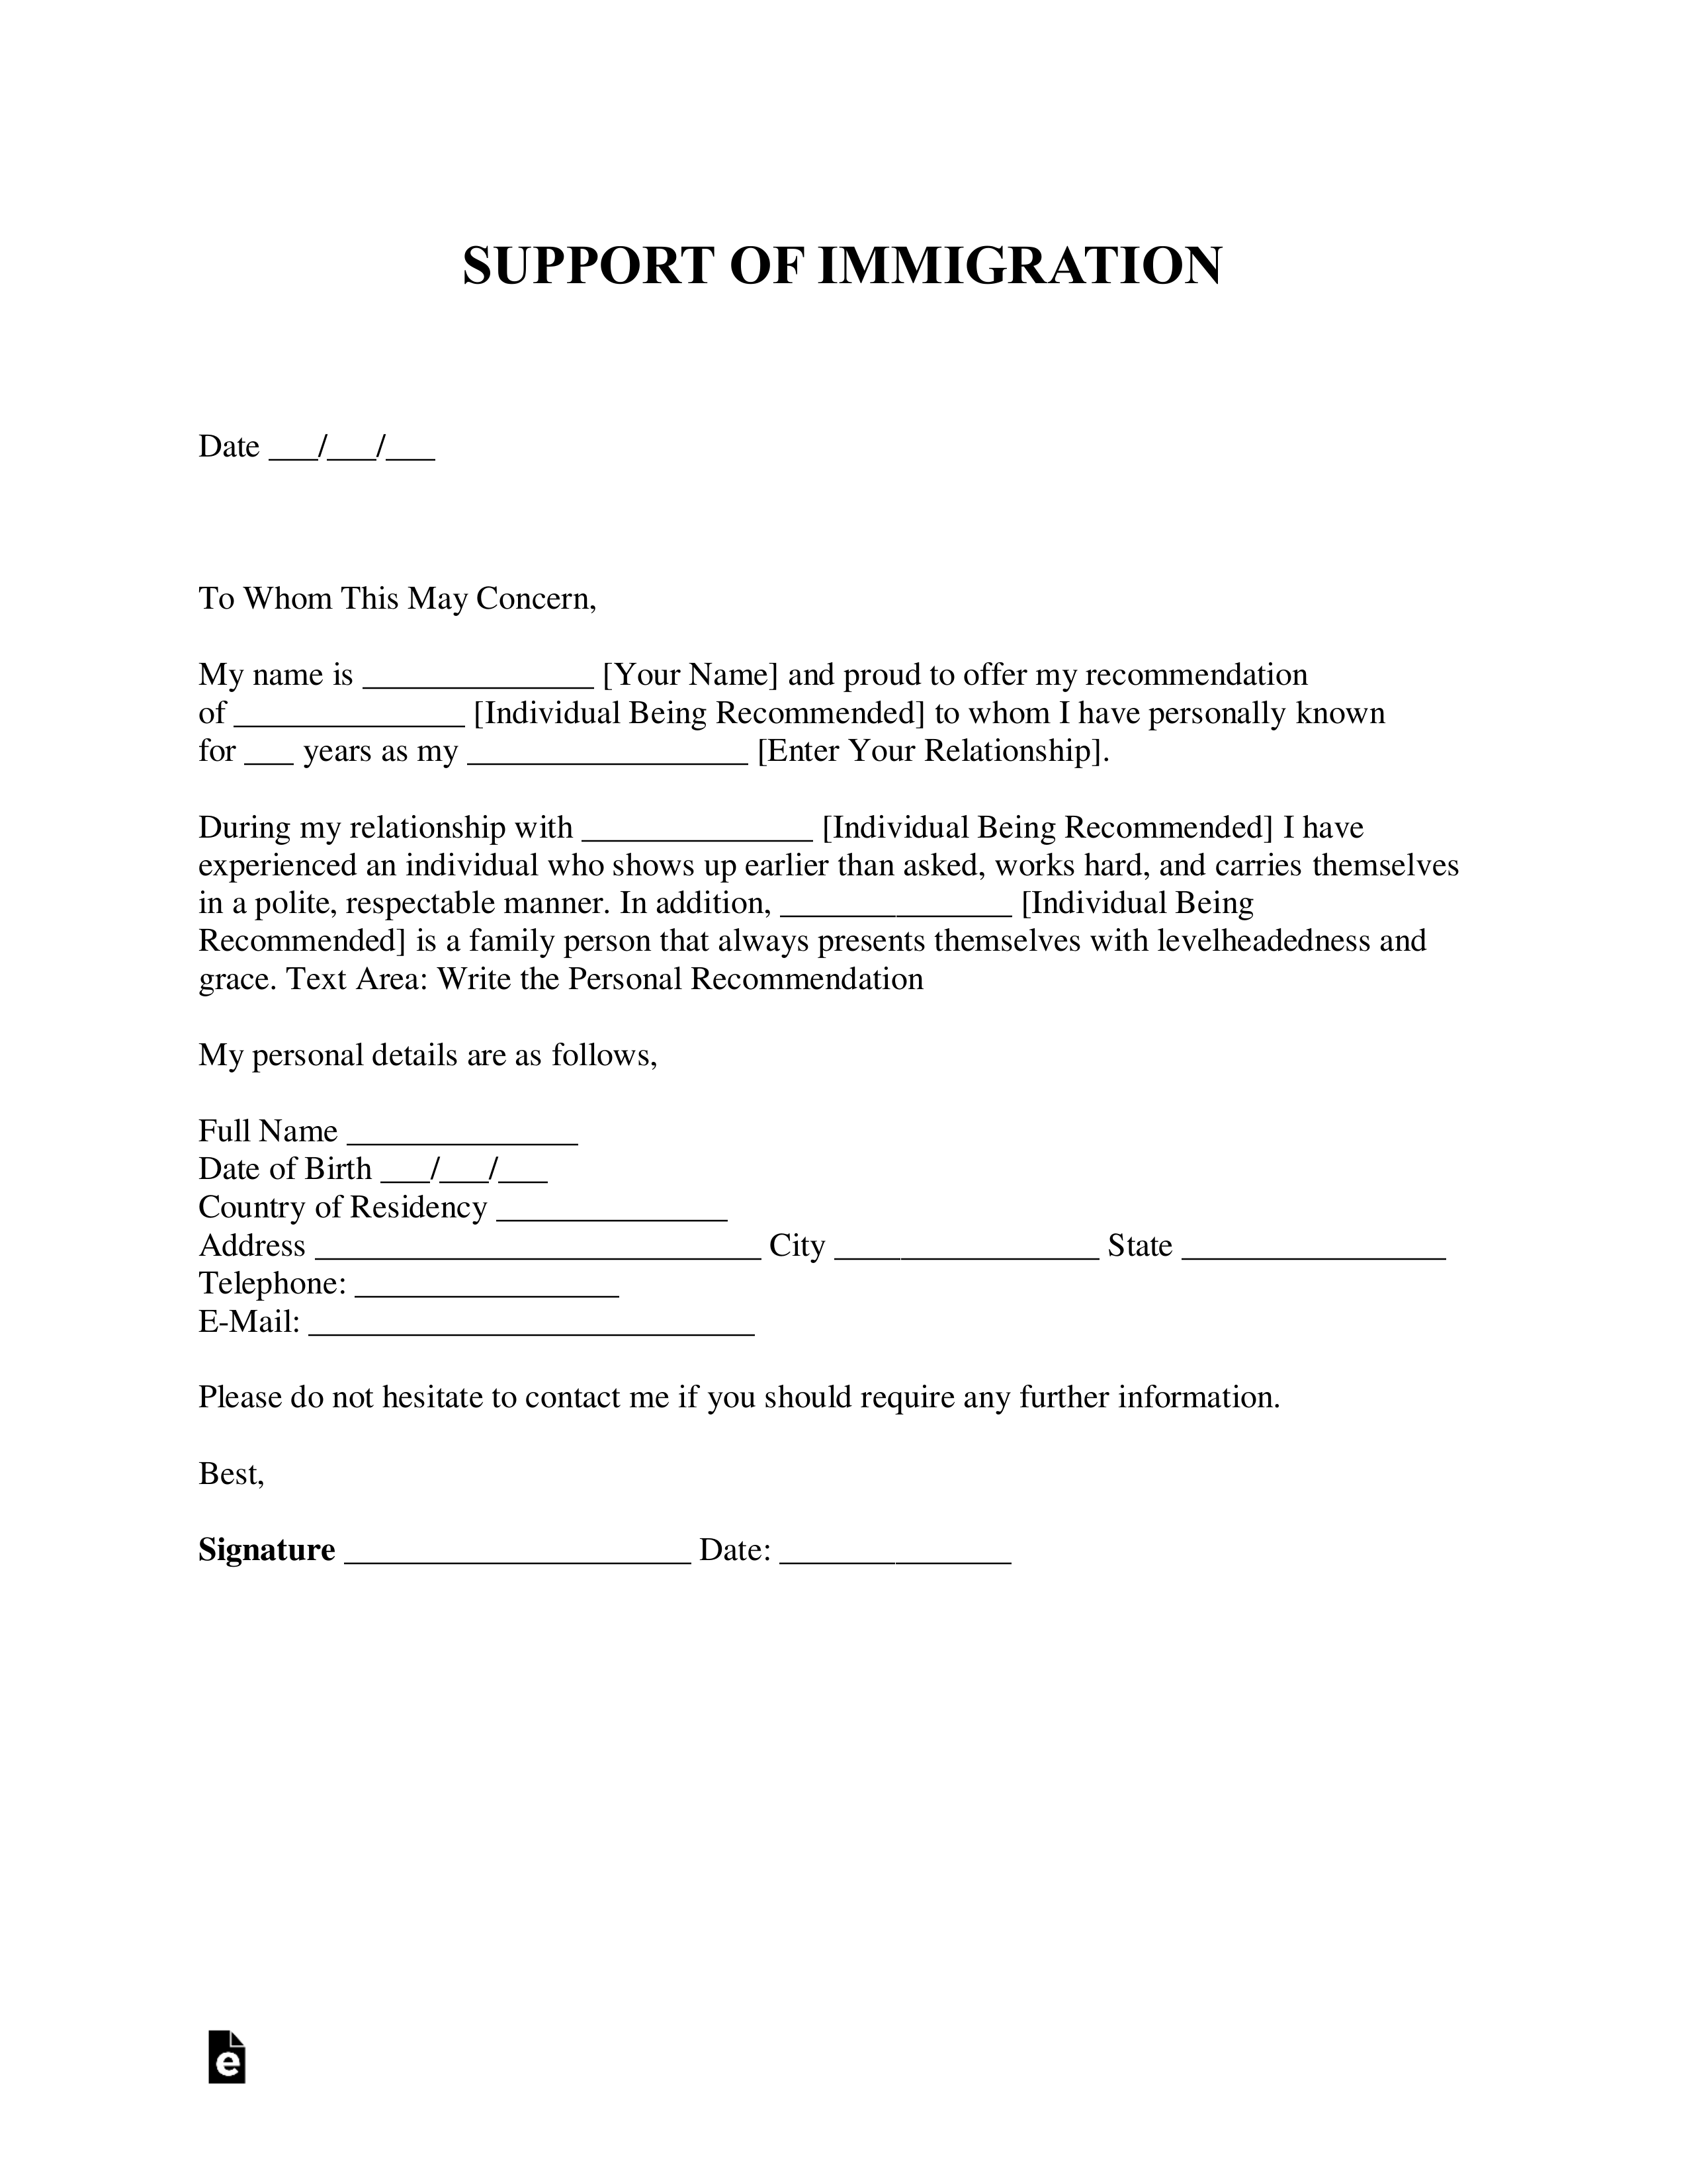 Letter To Uscis Template from eforms.com